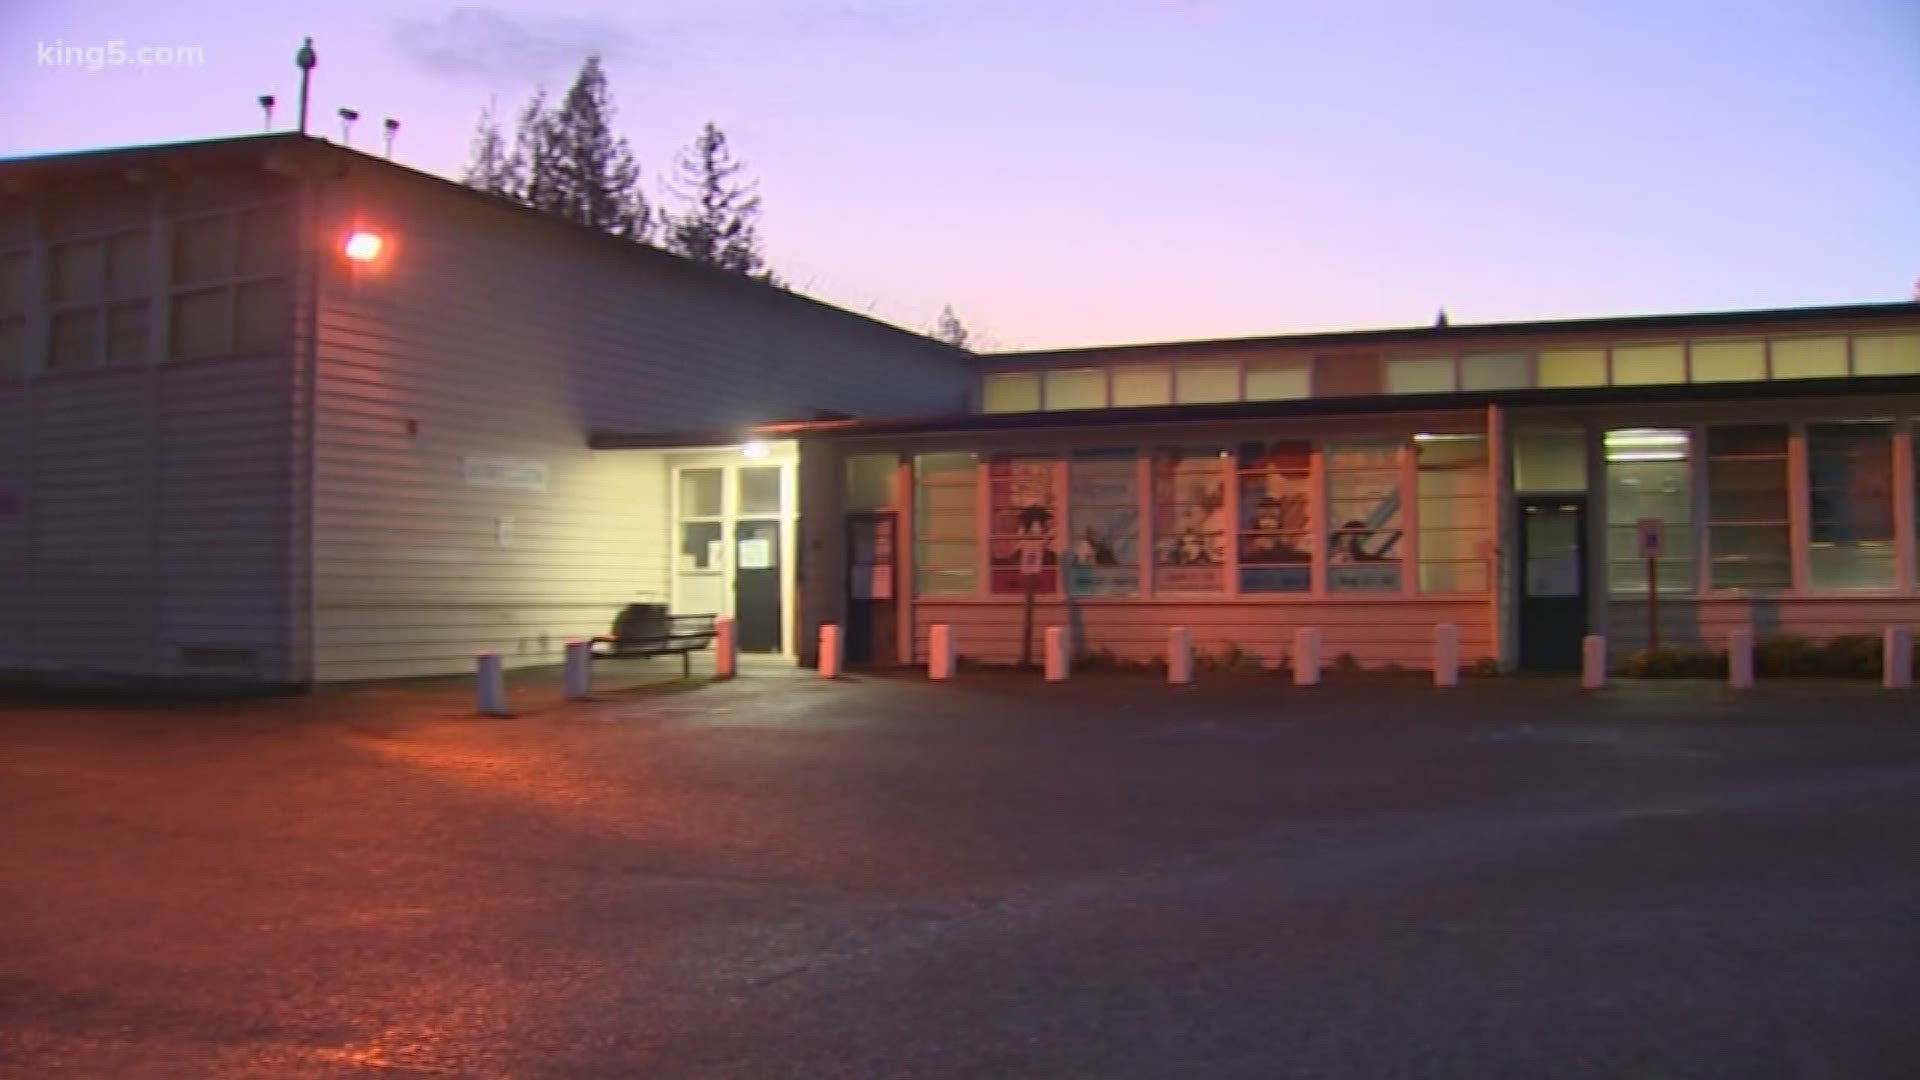 Theater groups and other community groups are hoping to stay in the Burien community center a bit longer.